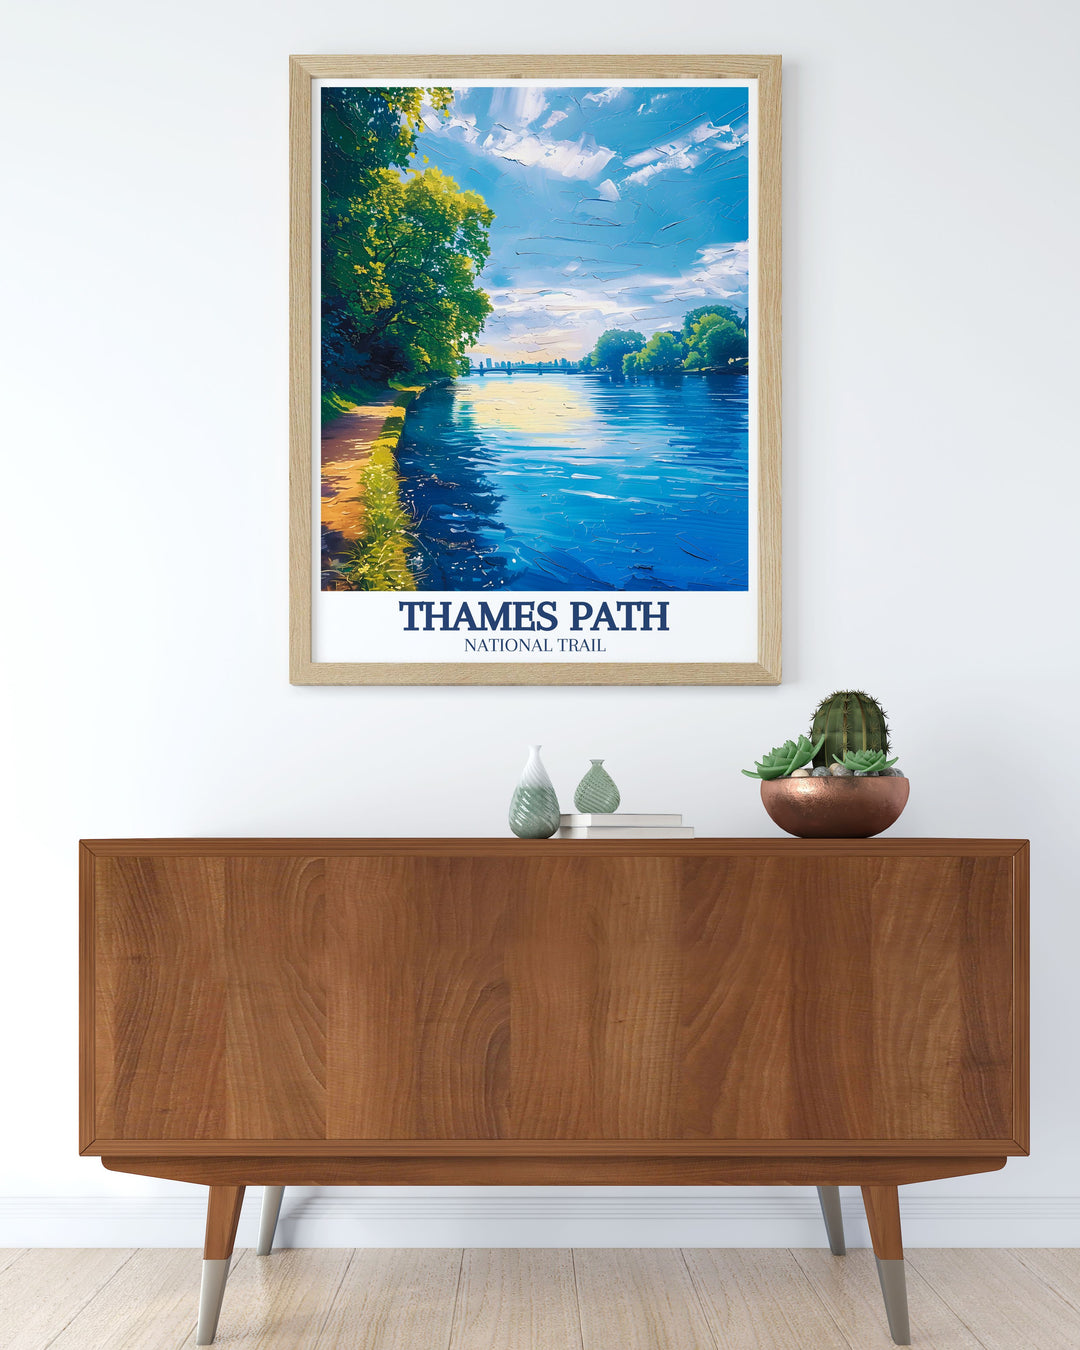 Elegant River Thames vintage print showcasing the rivers path through Putney London and beyond perfect for those who appreciate Londons rich history and want to add a classic touch to their decor